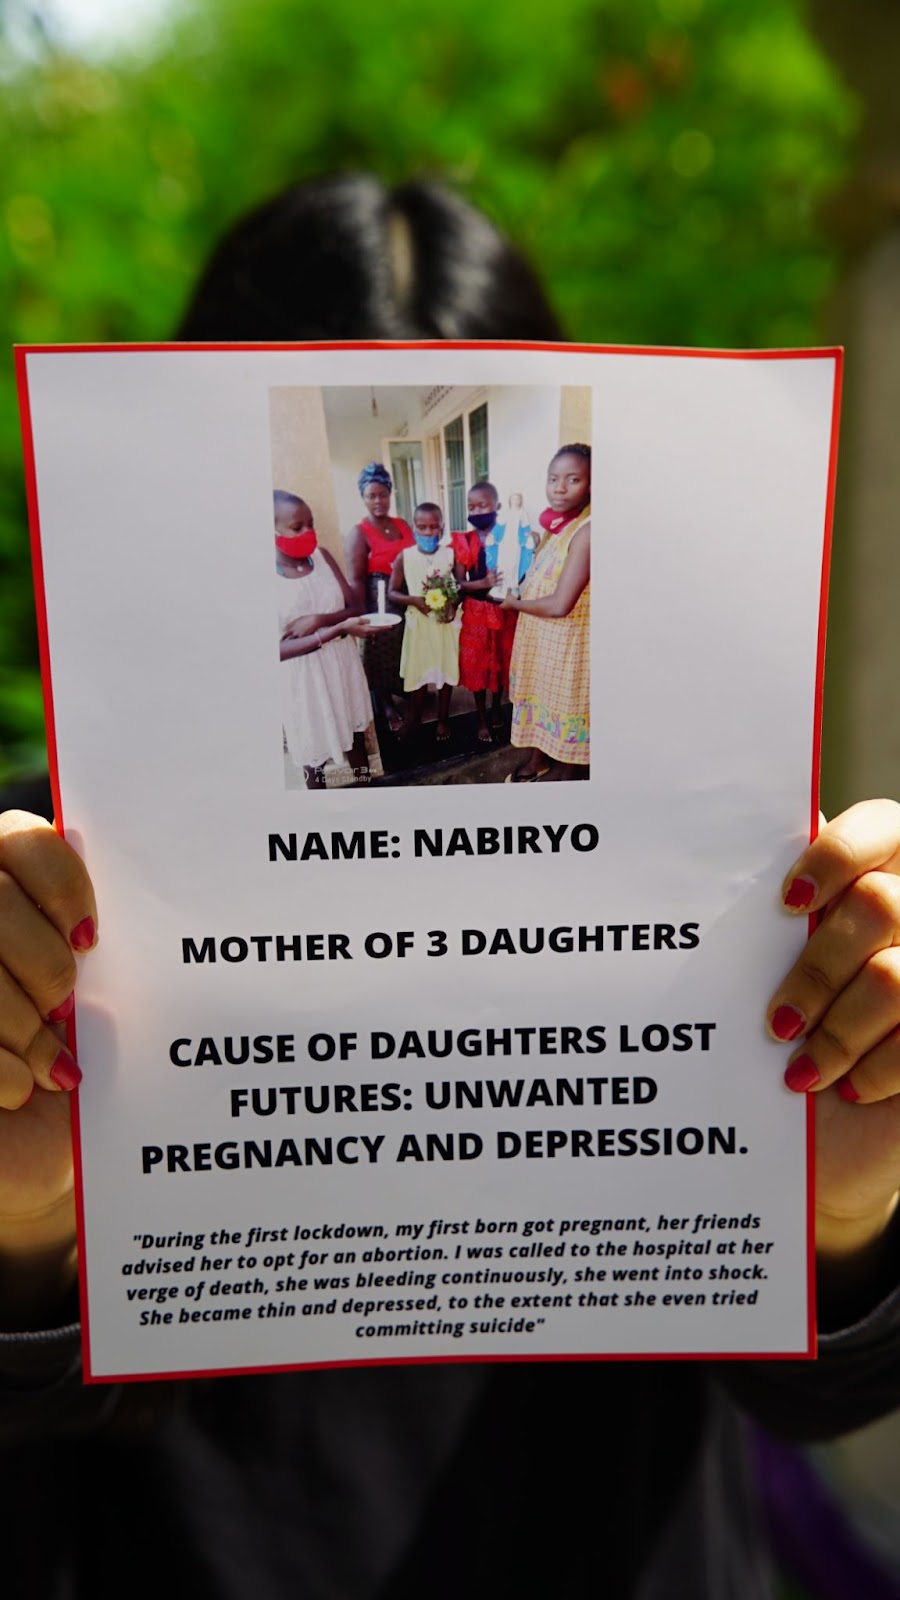 Lost future image reading:
Name: Nabiryo,
Mother of 3 Daughters,
Cause of Daughters Lost Futures: Unwanted Pregnancy and Depression